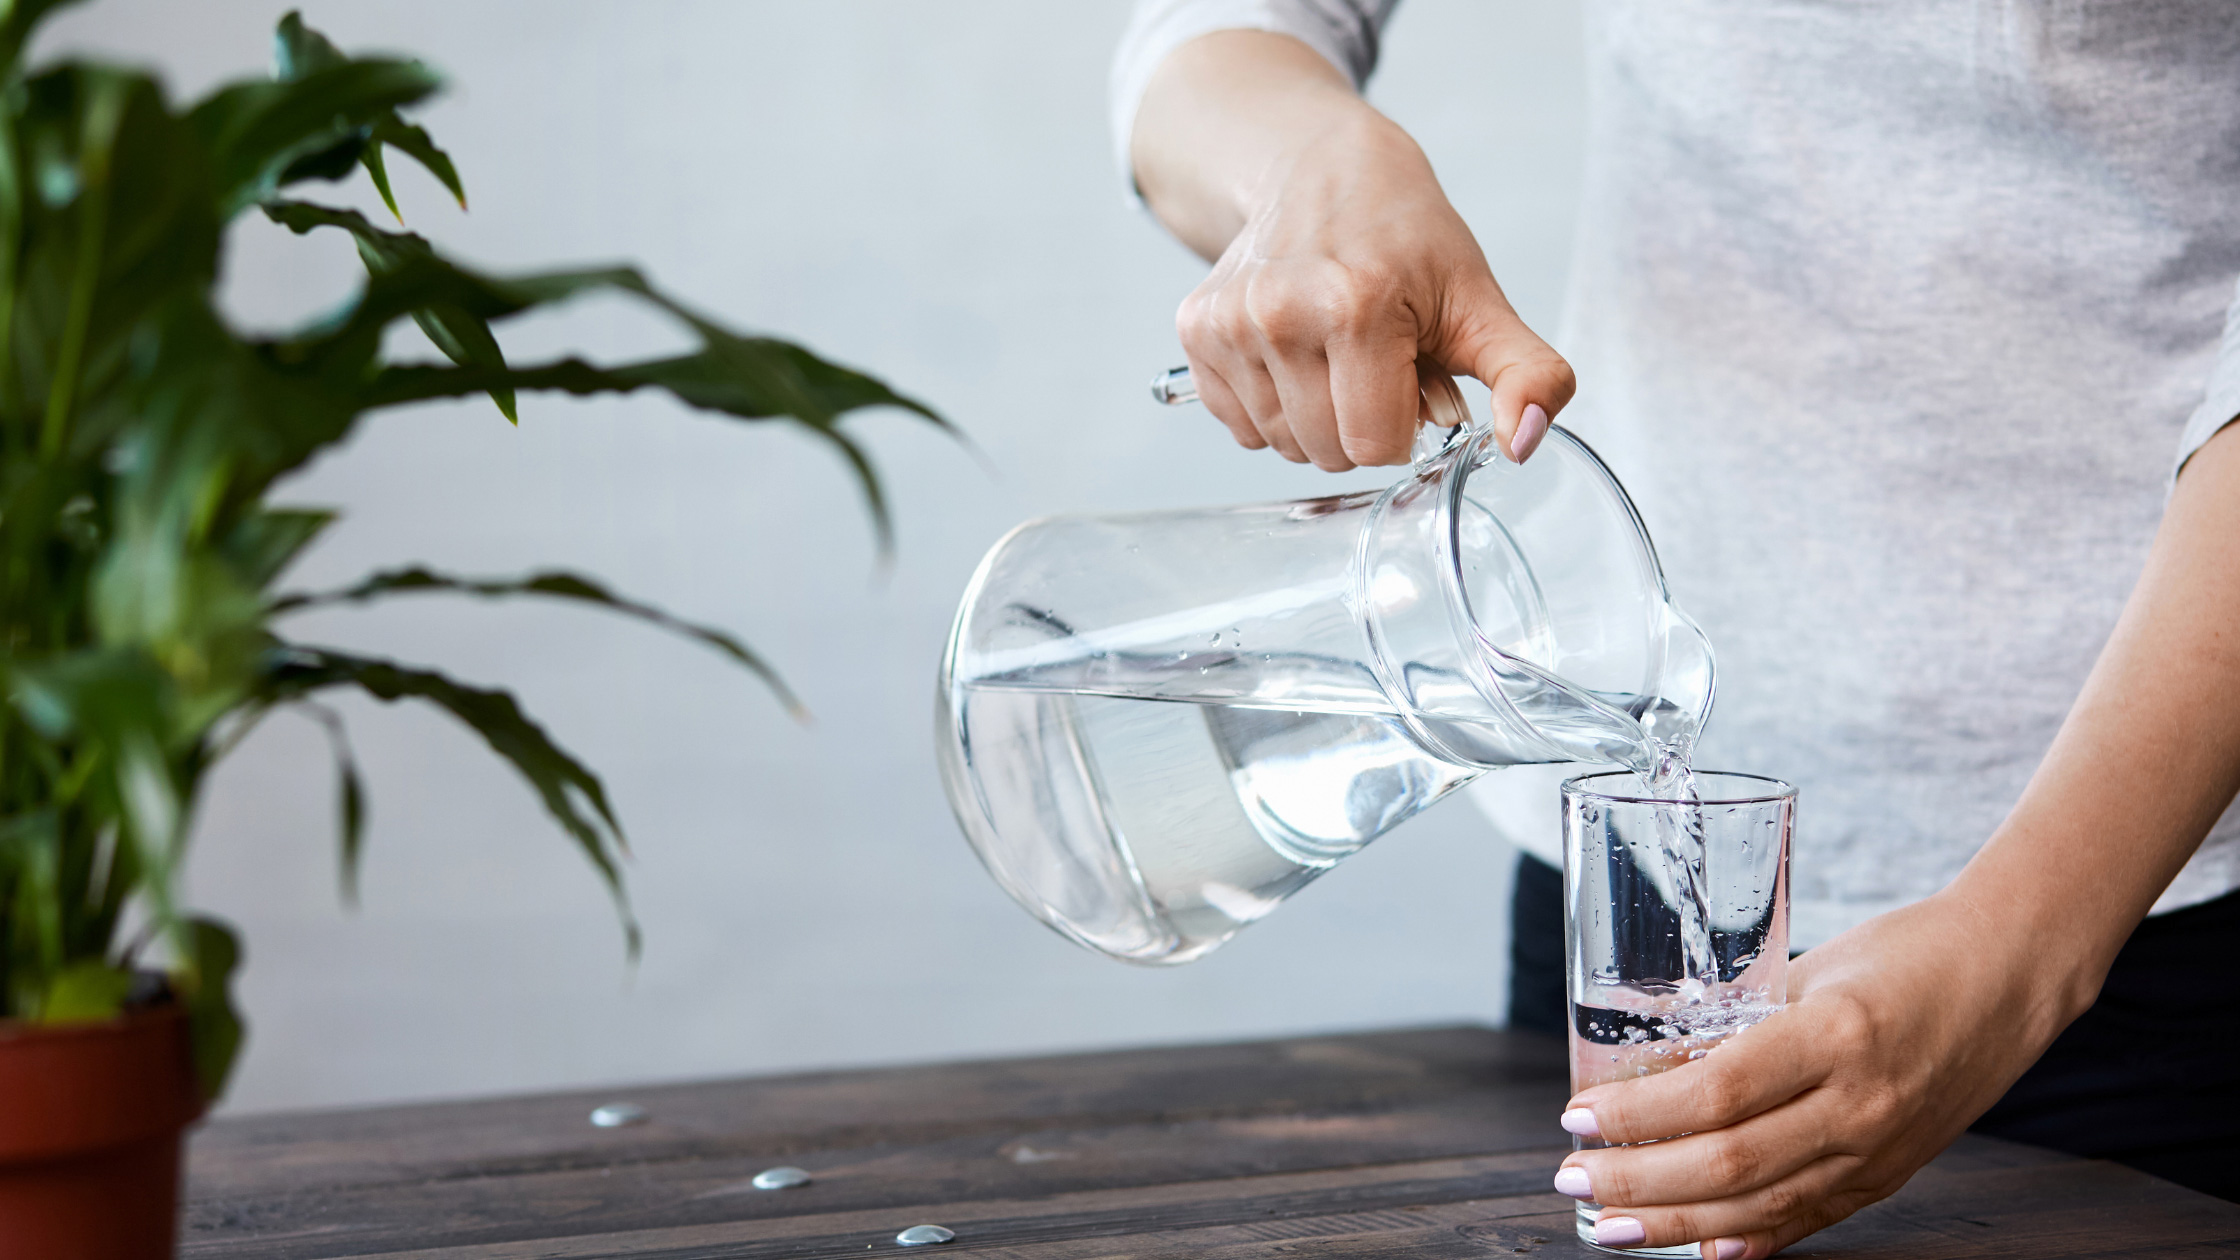 Woman pouring a glass of water. Image: canva